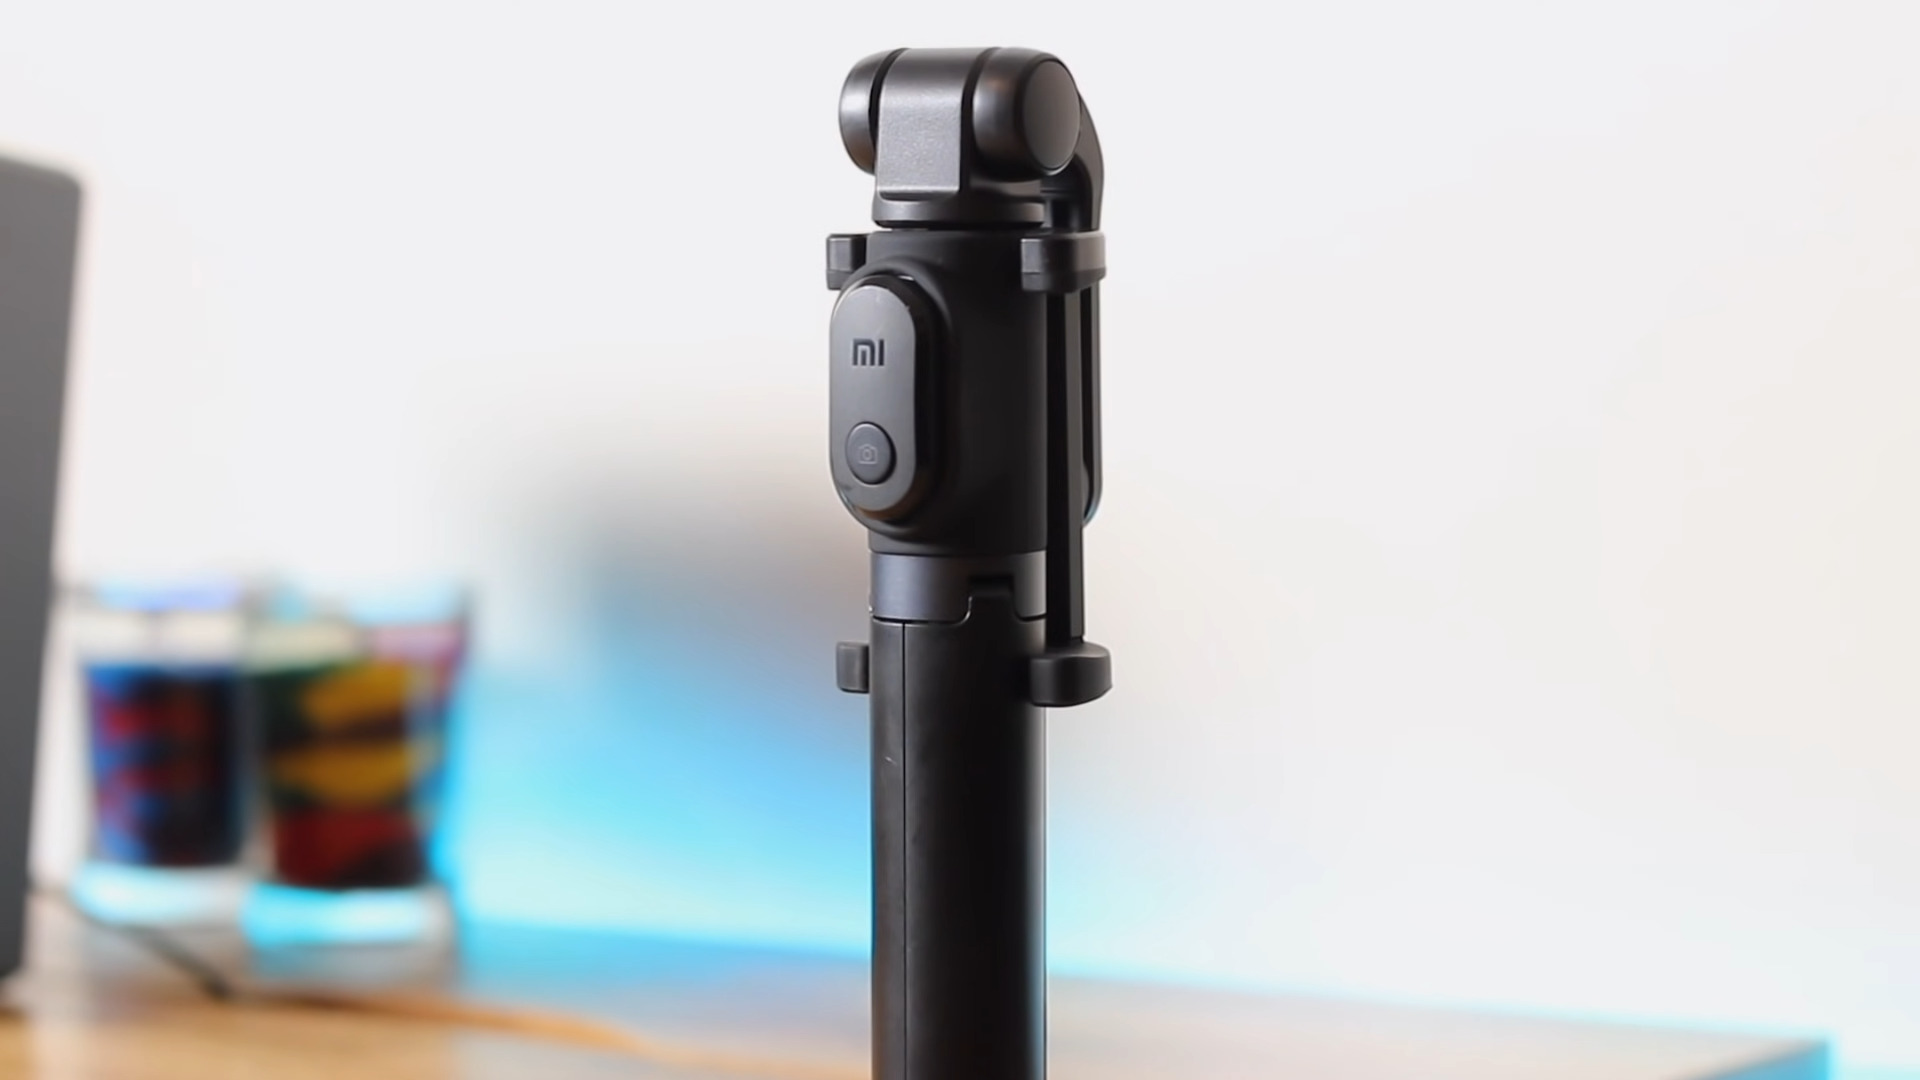 What's so special about the Xiaomi Bluetooth Selfie Stick?